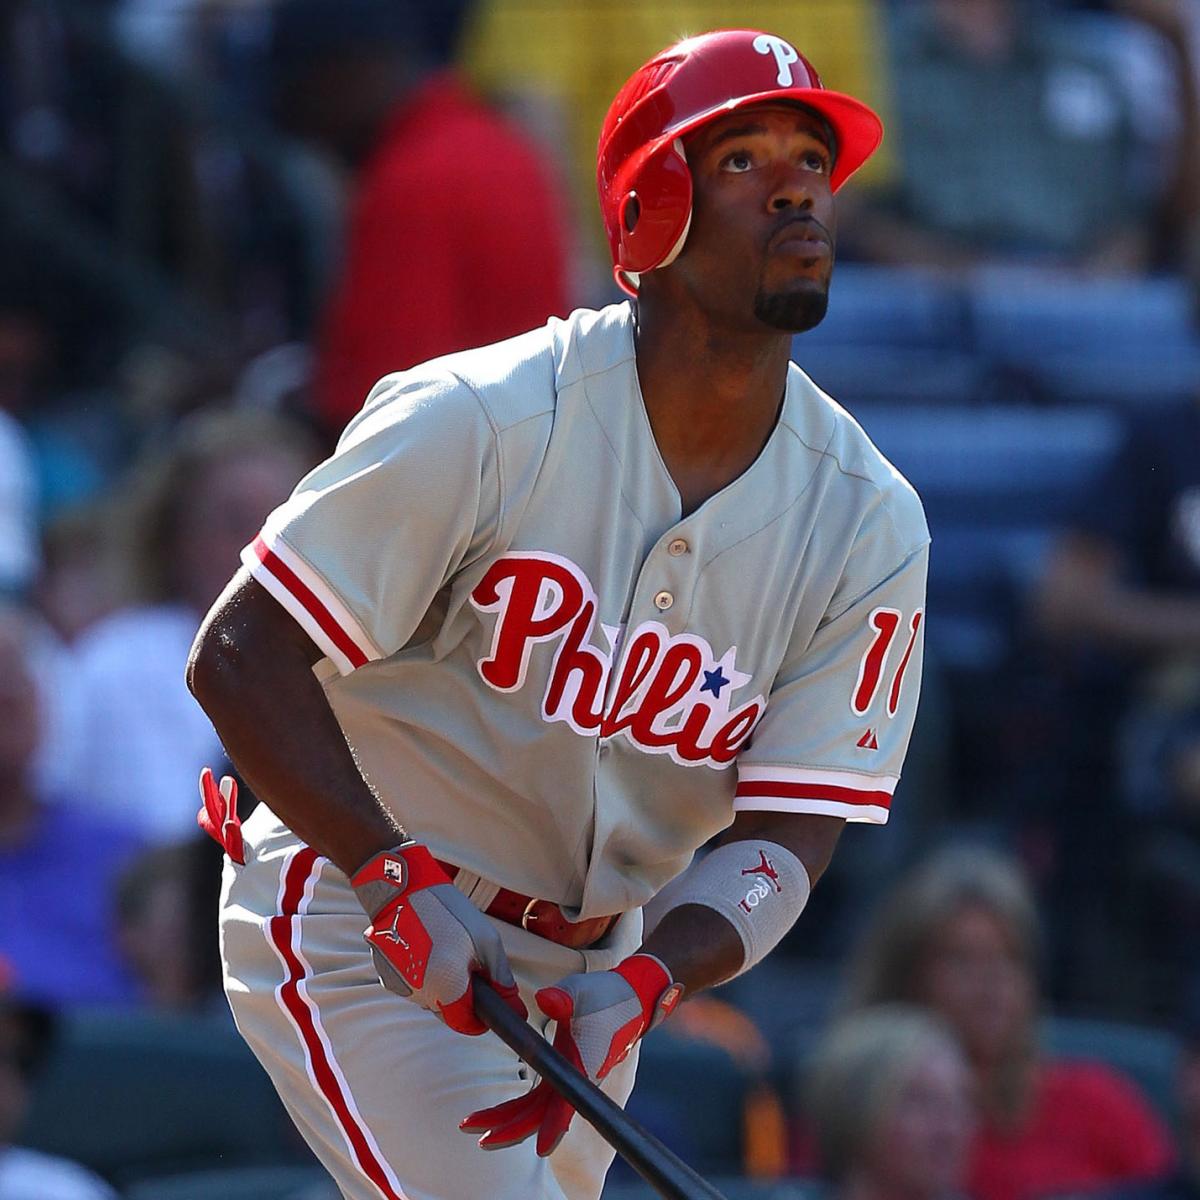 JIMMY ROLLINS on X: Looking forward to seeing a group of guys